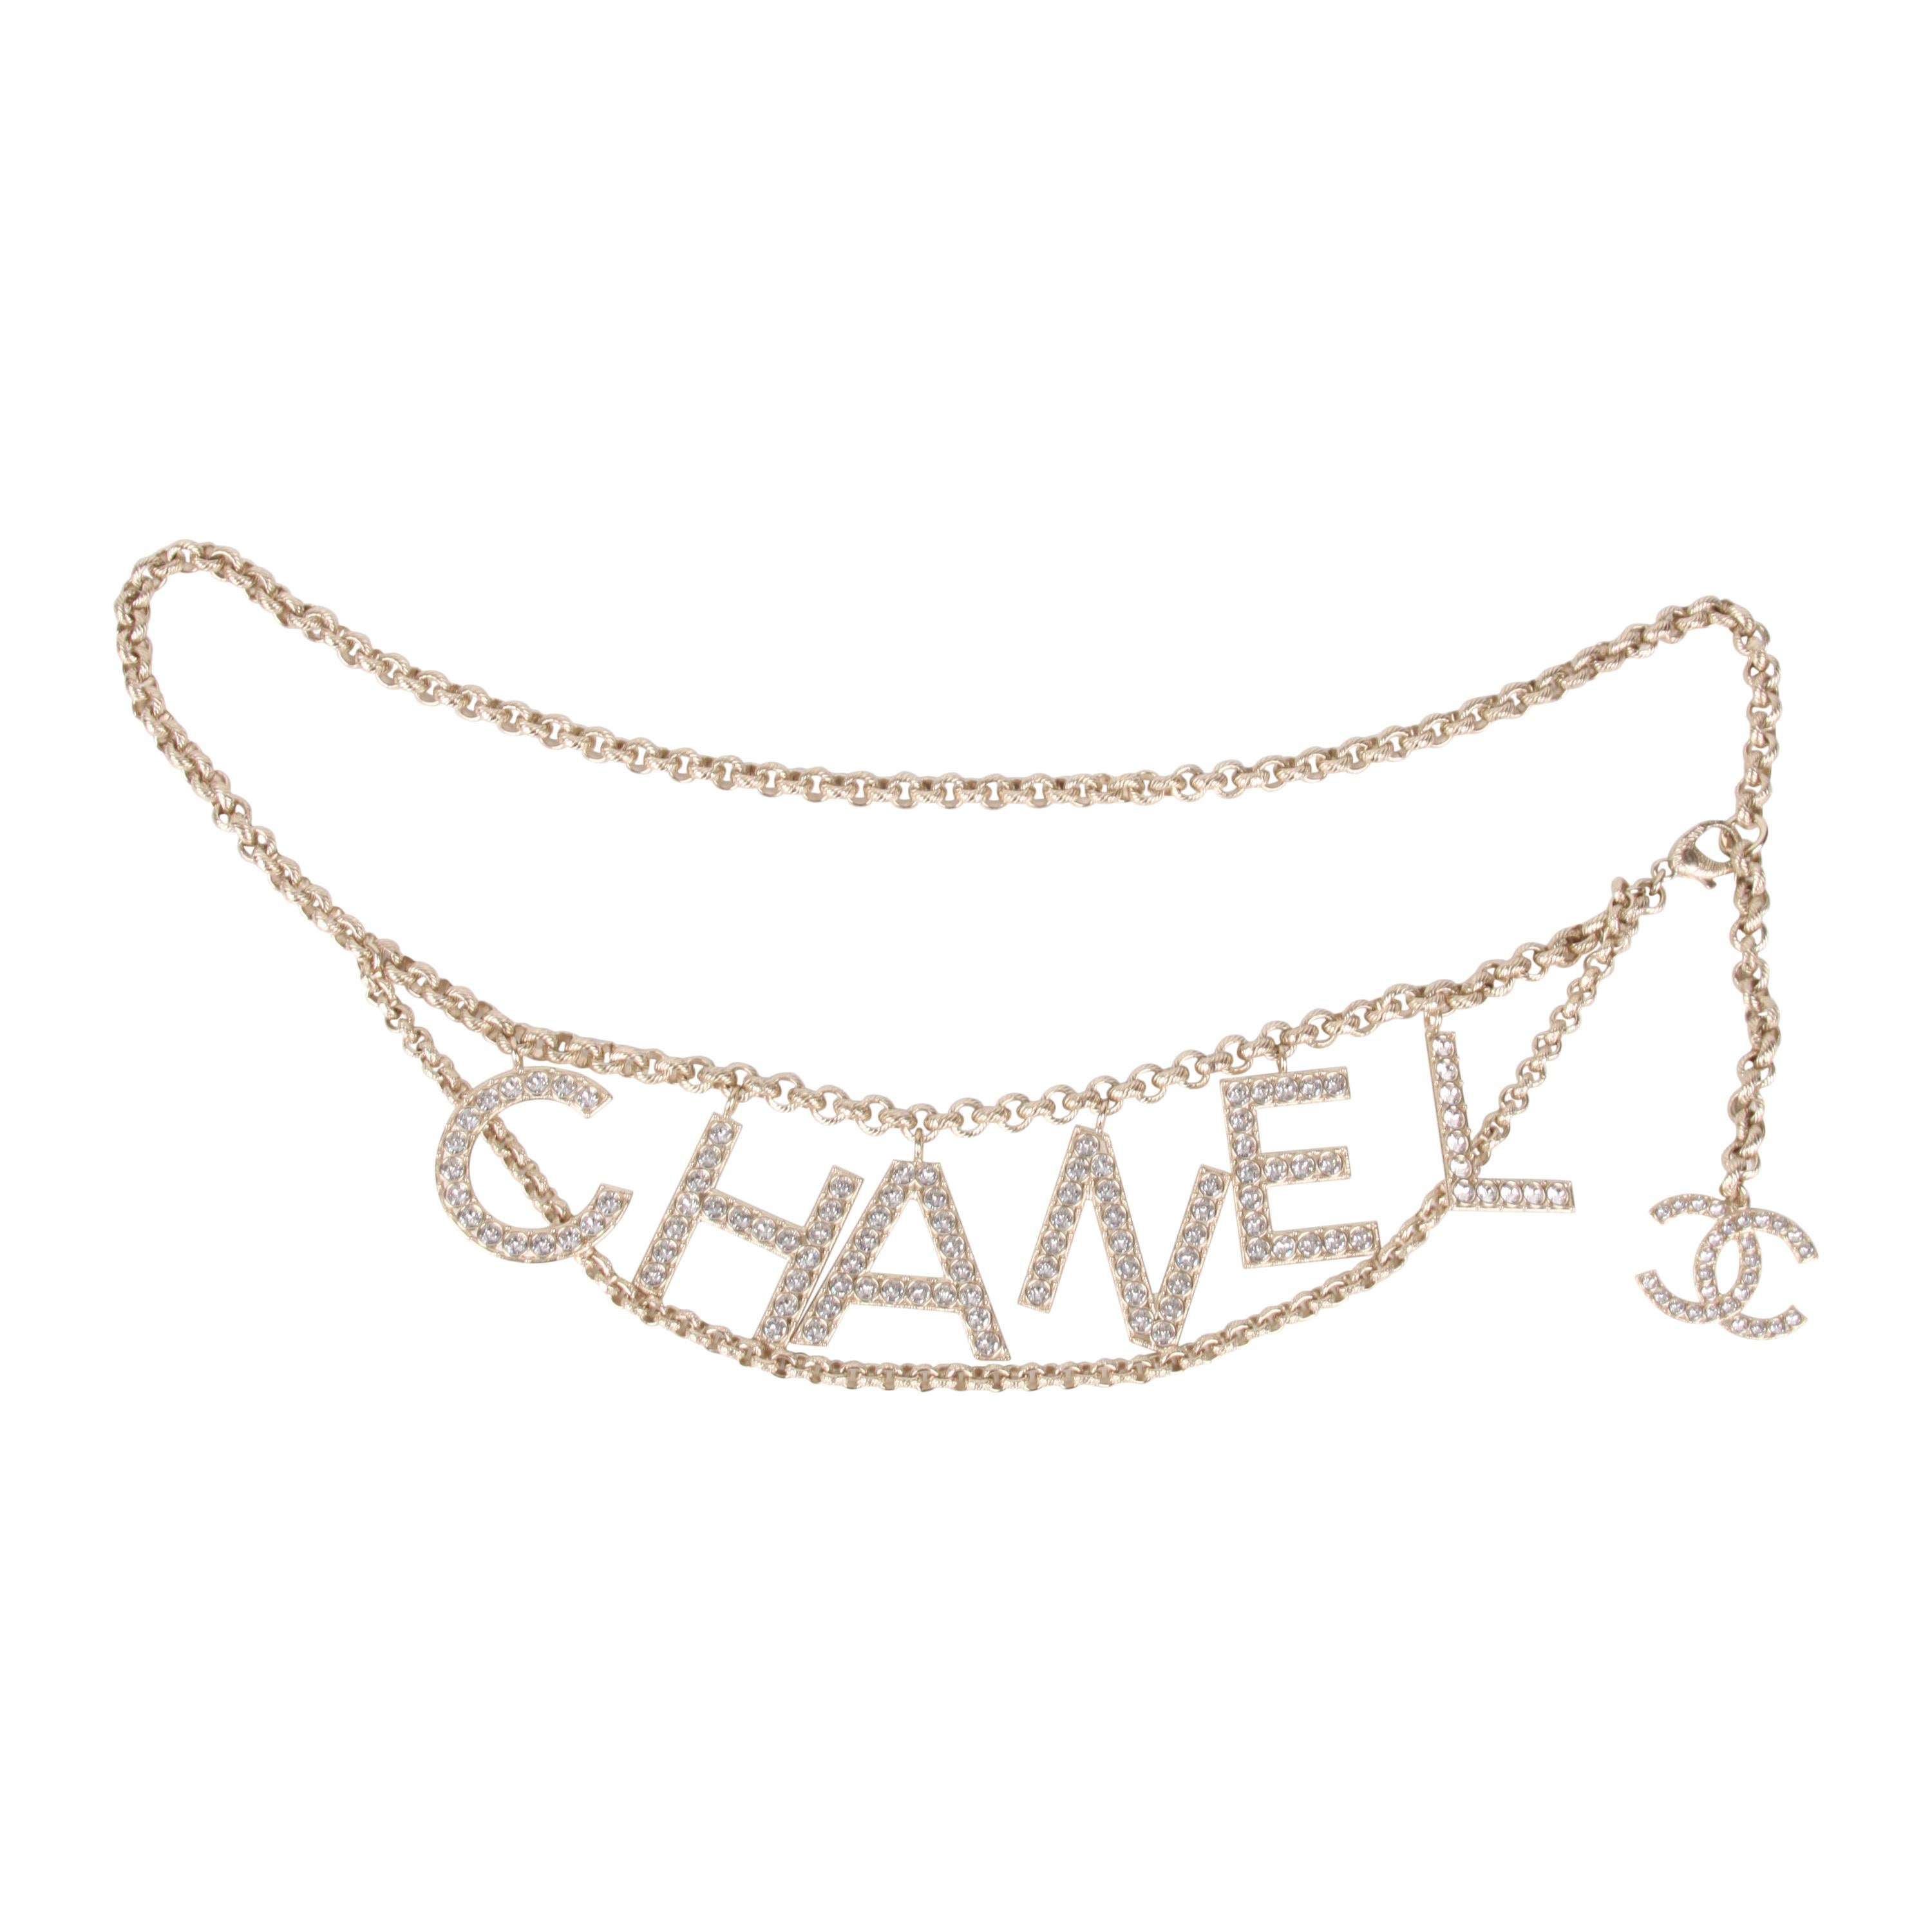 Chanel S/S 2019 Crystal Logo Gold Chain Belt